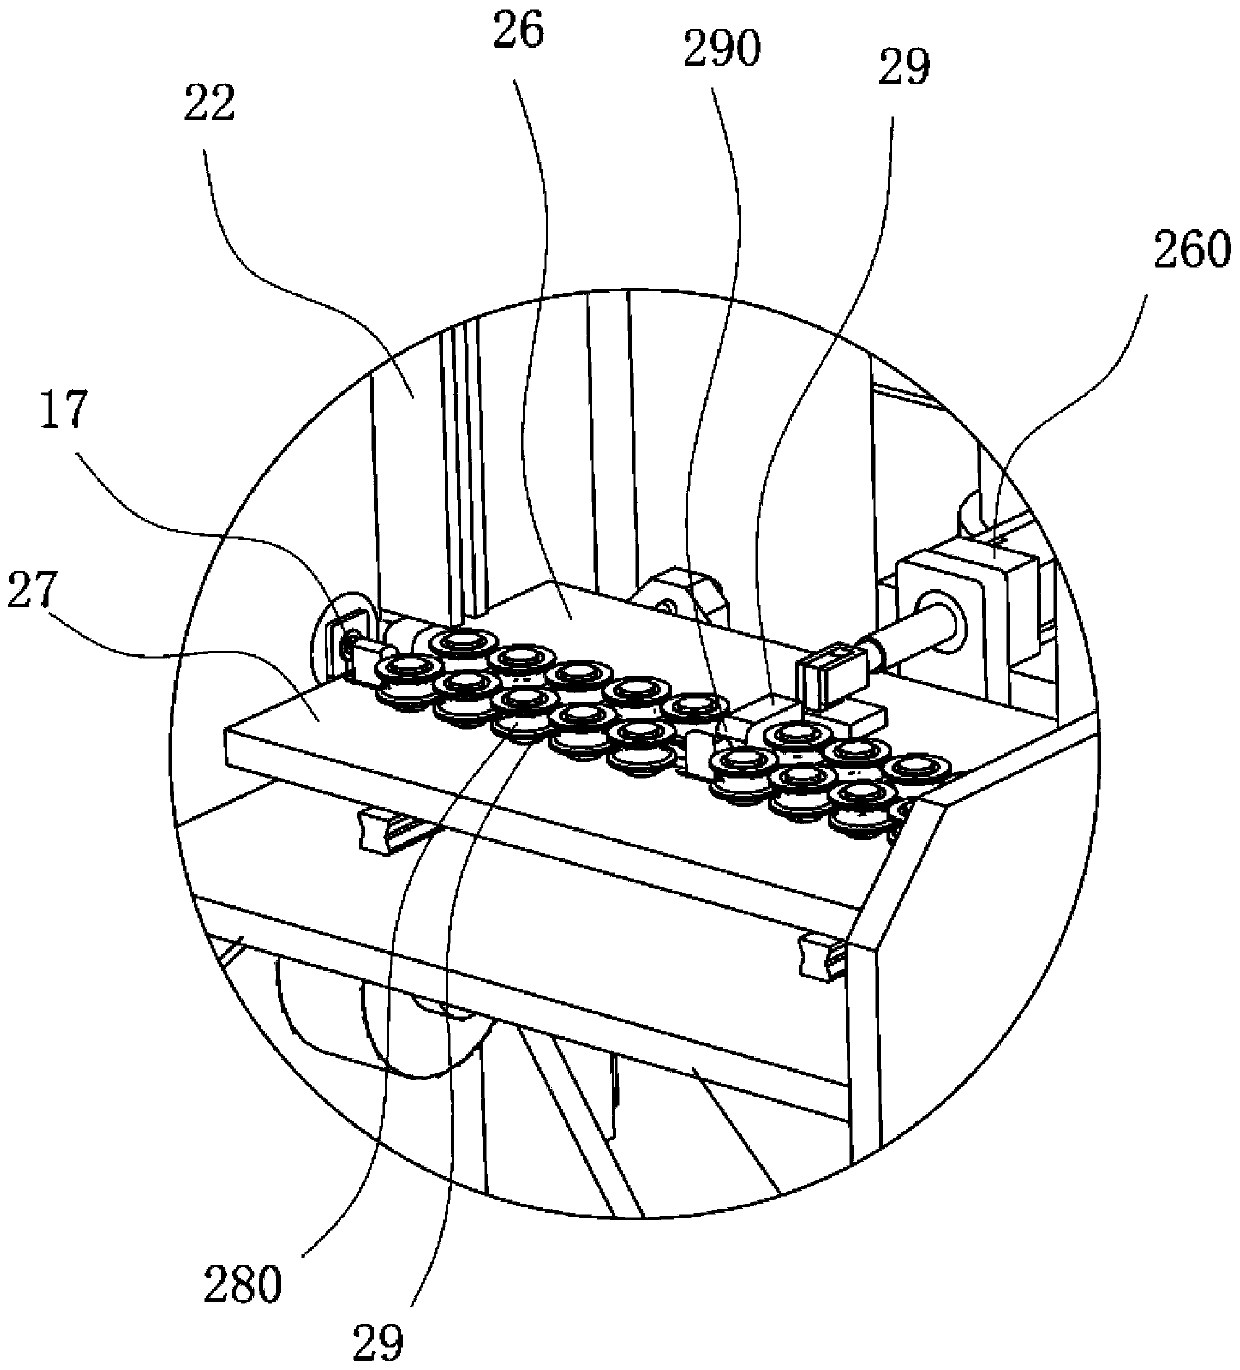 Device for sleeving steel bars with pipes